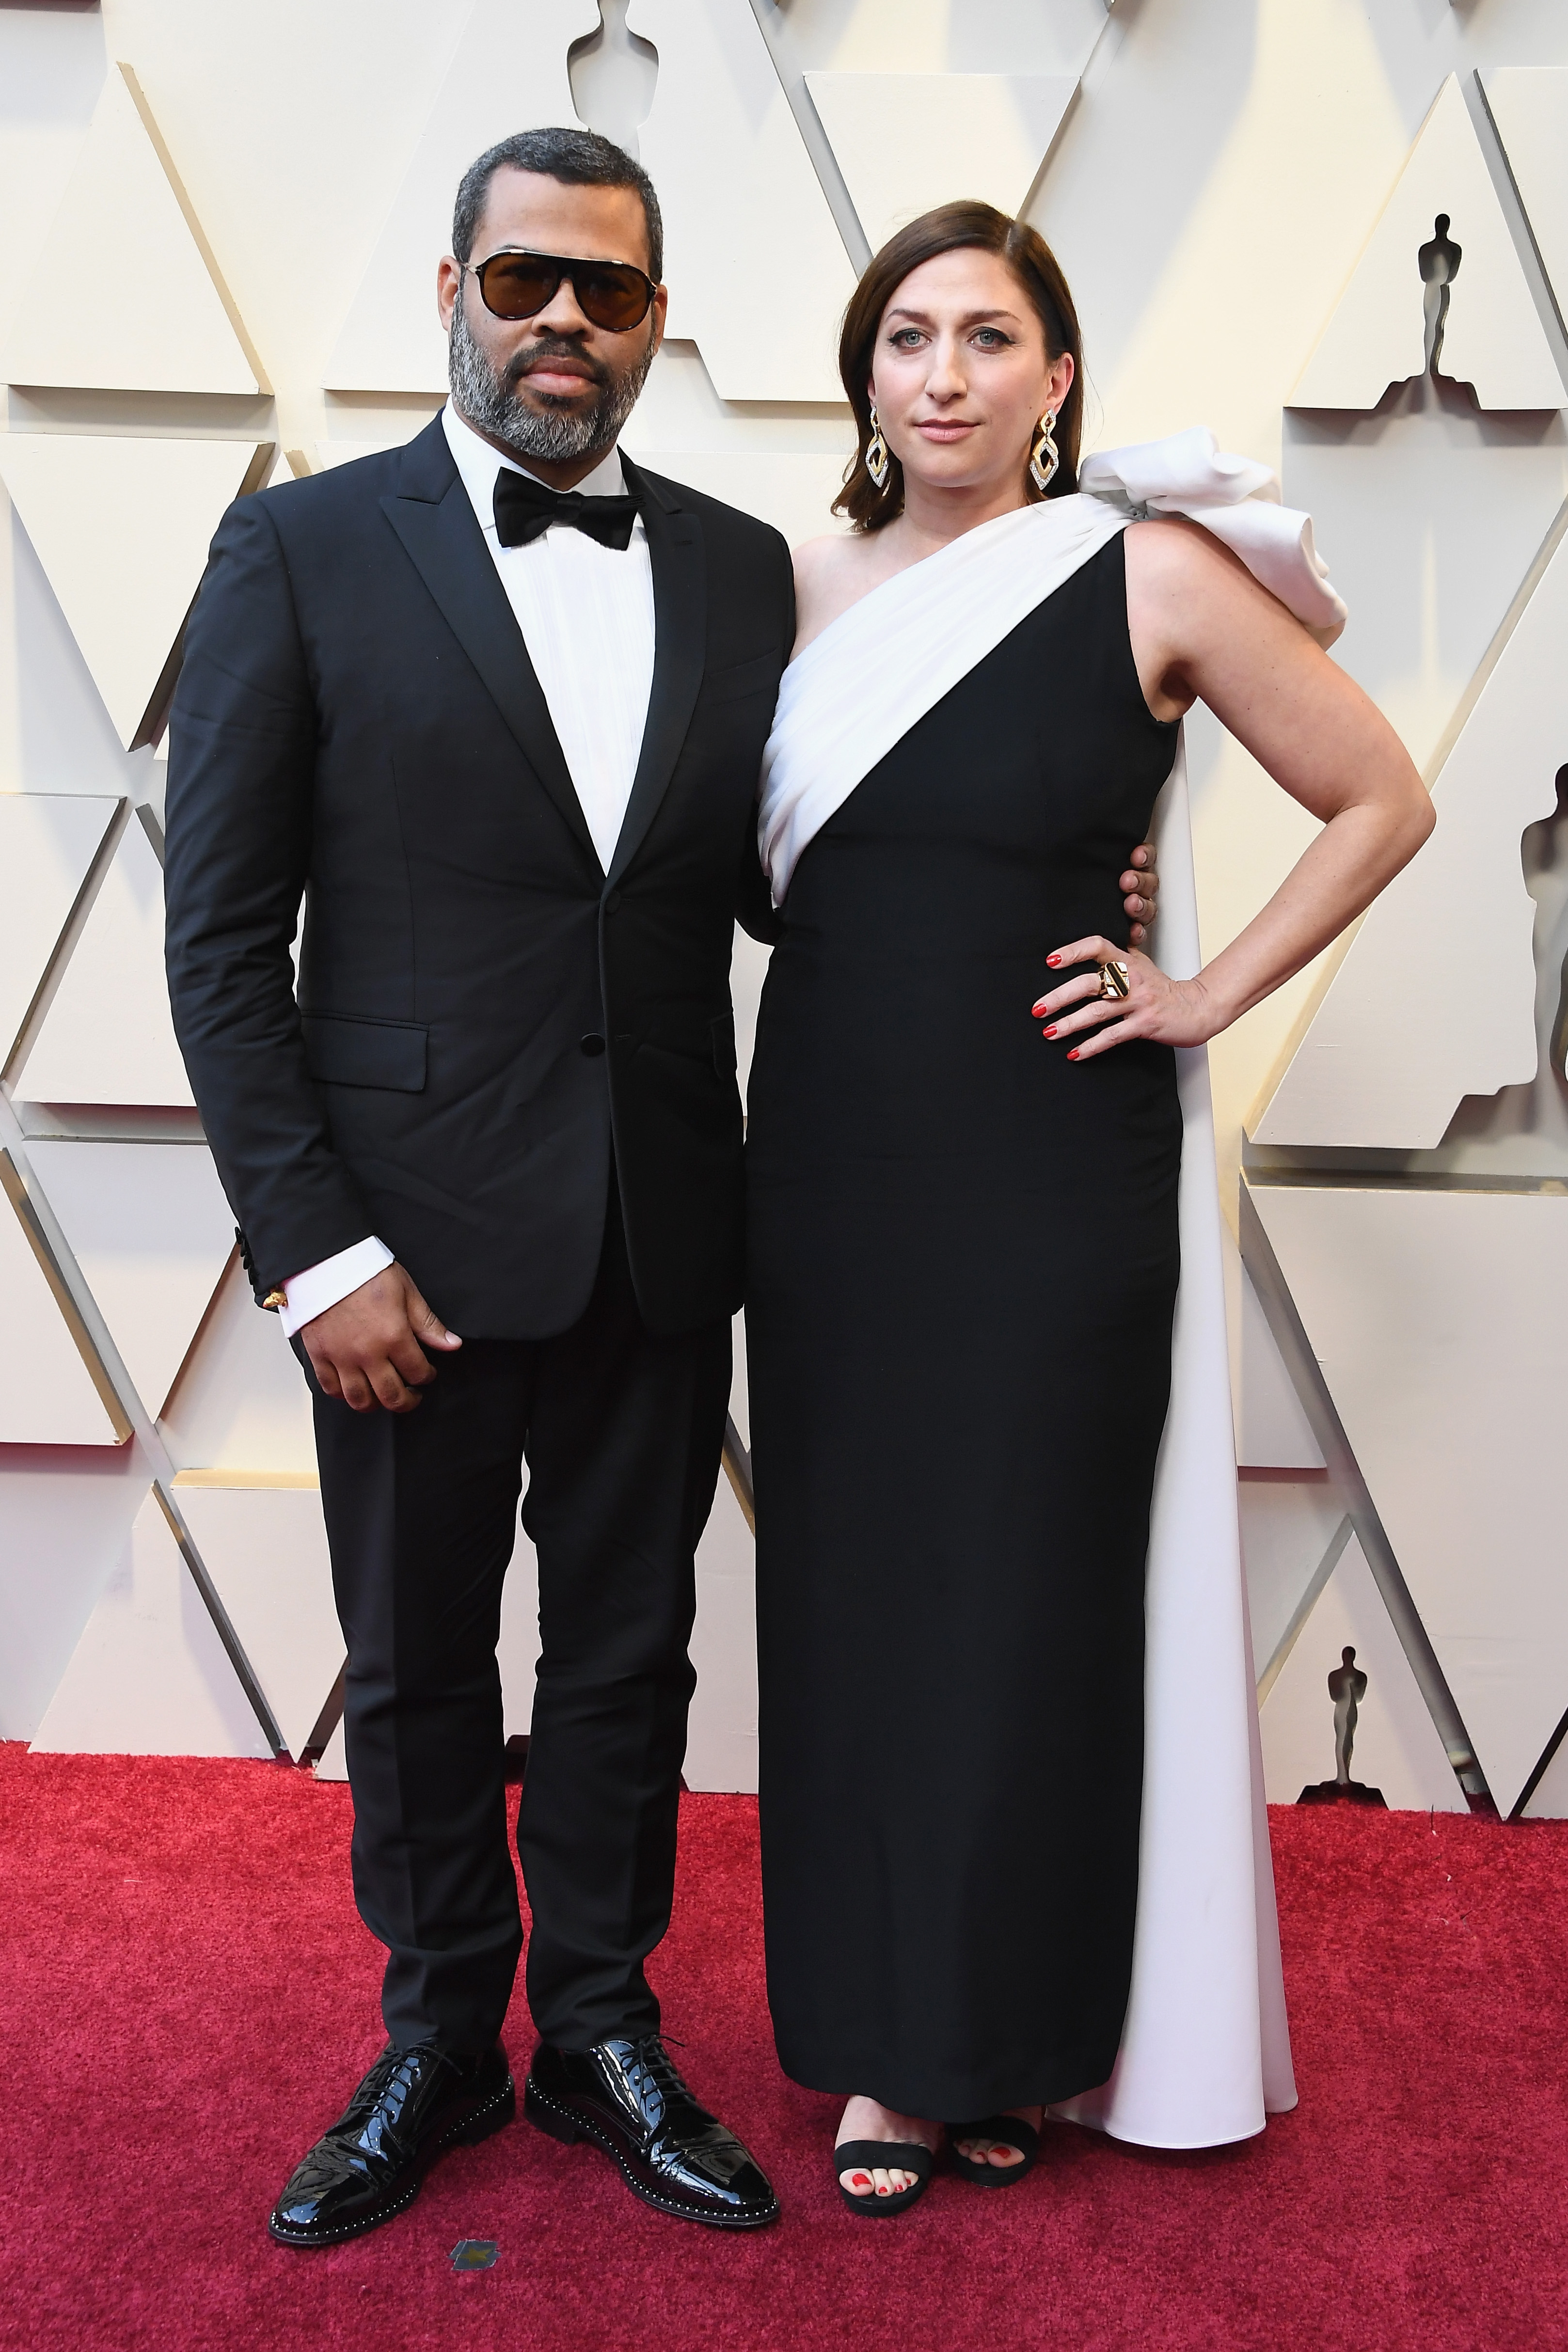 Oscars 2019 Check Out the Cutest Couples on the Red Carpet!